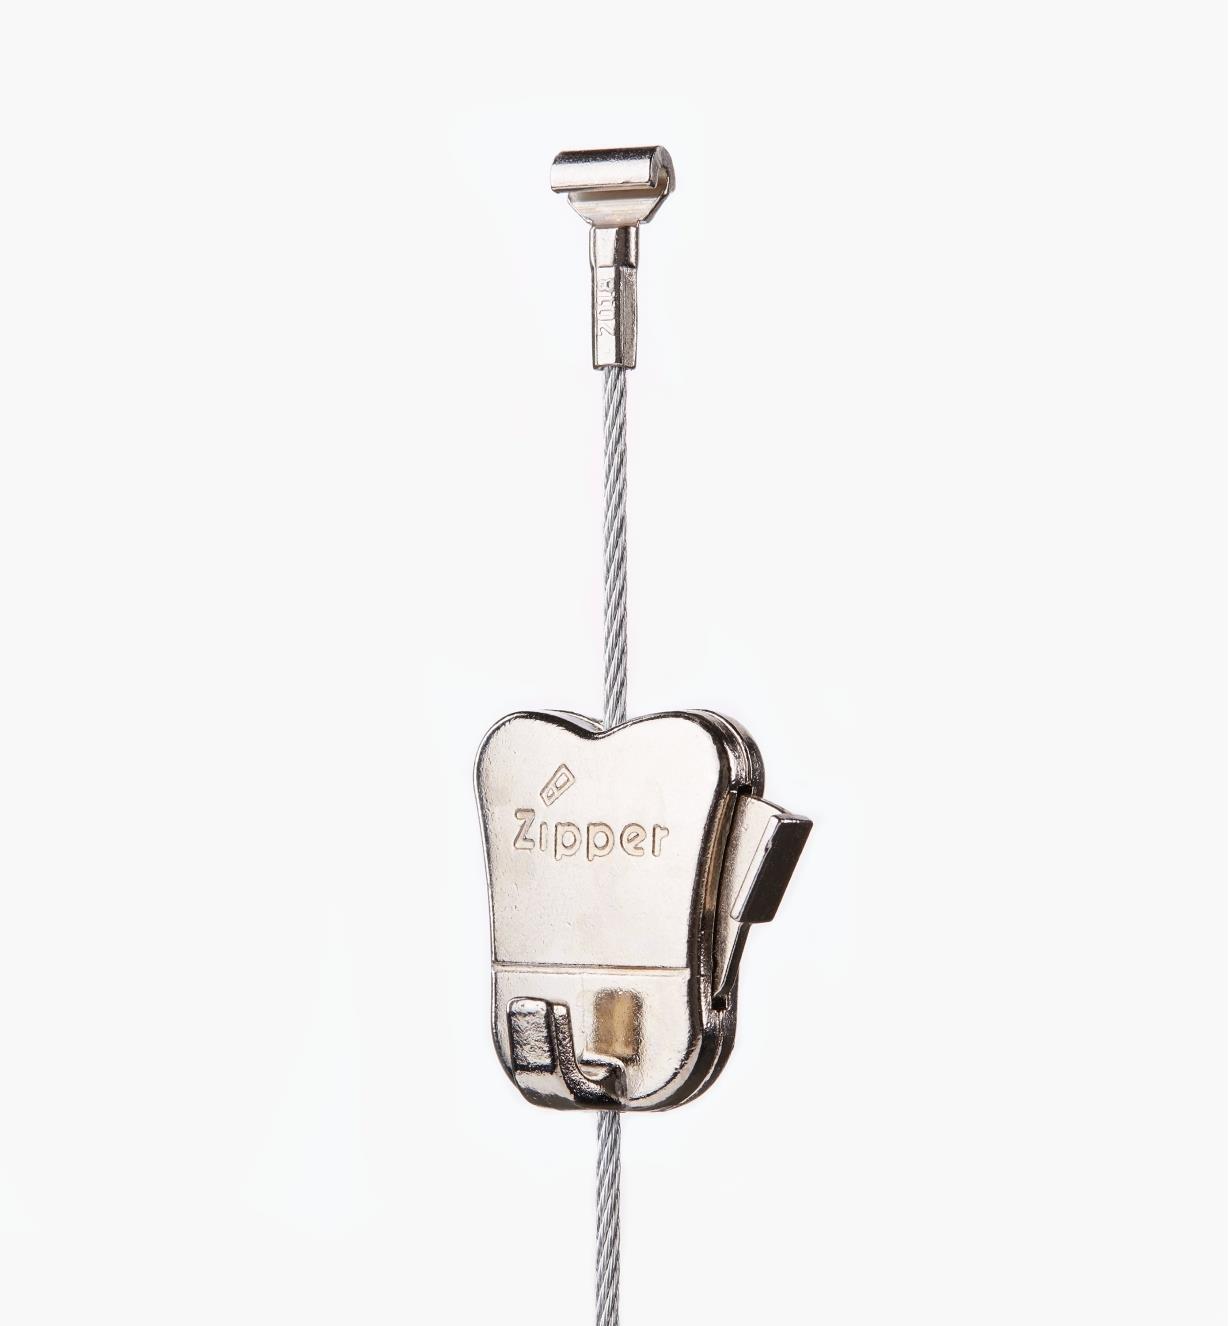 Cliprail Zipper Picture Hook hanging from a steel cable